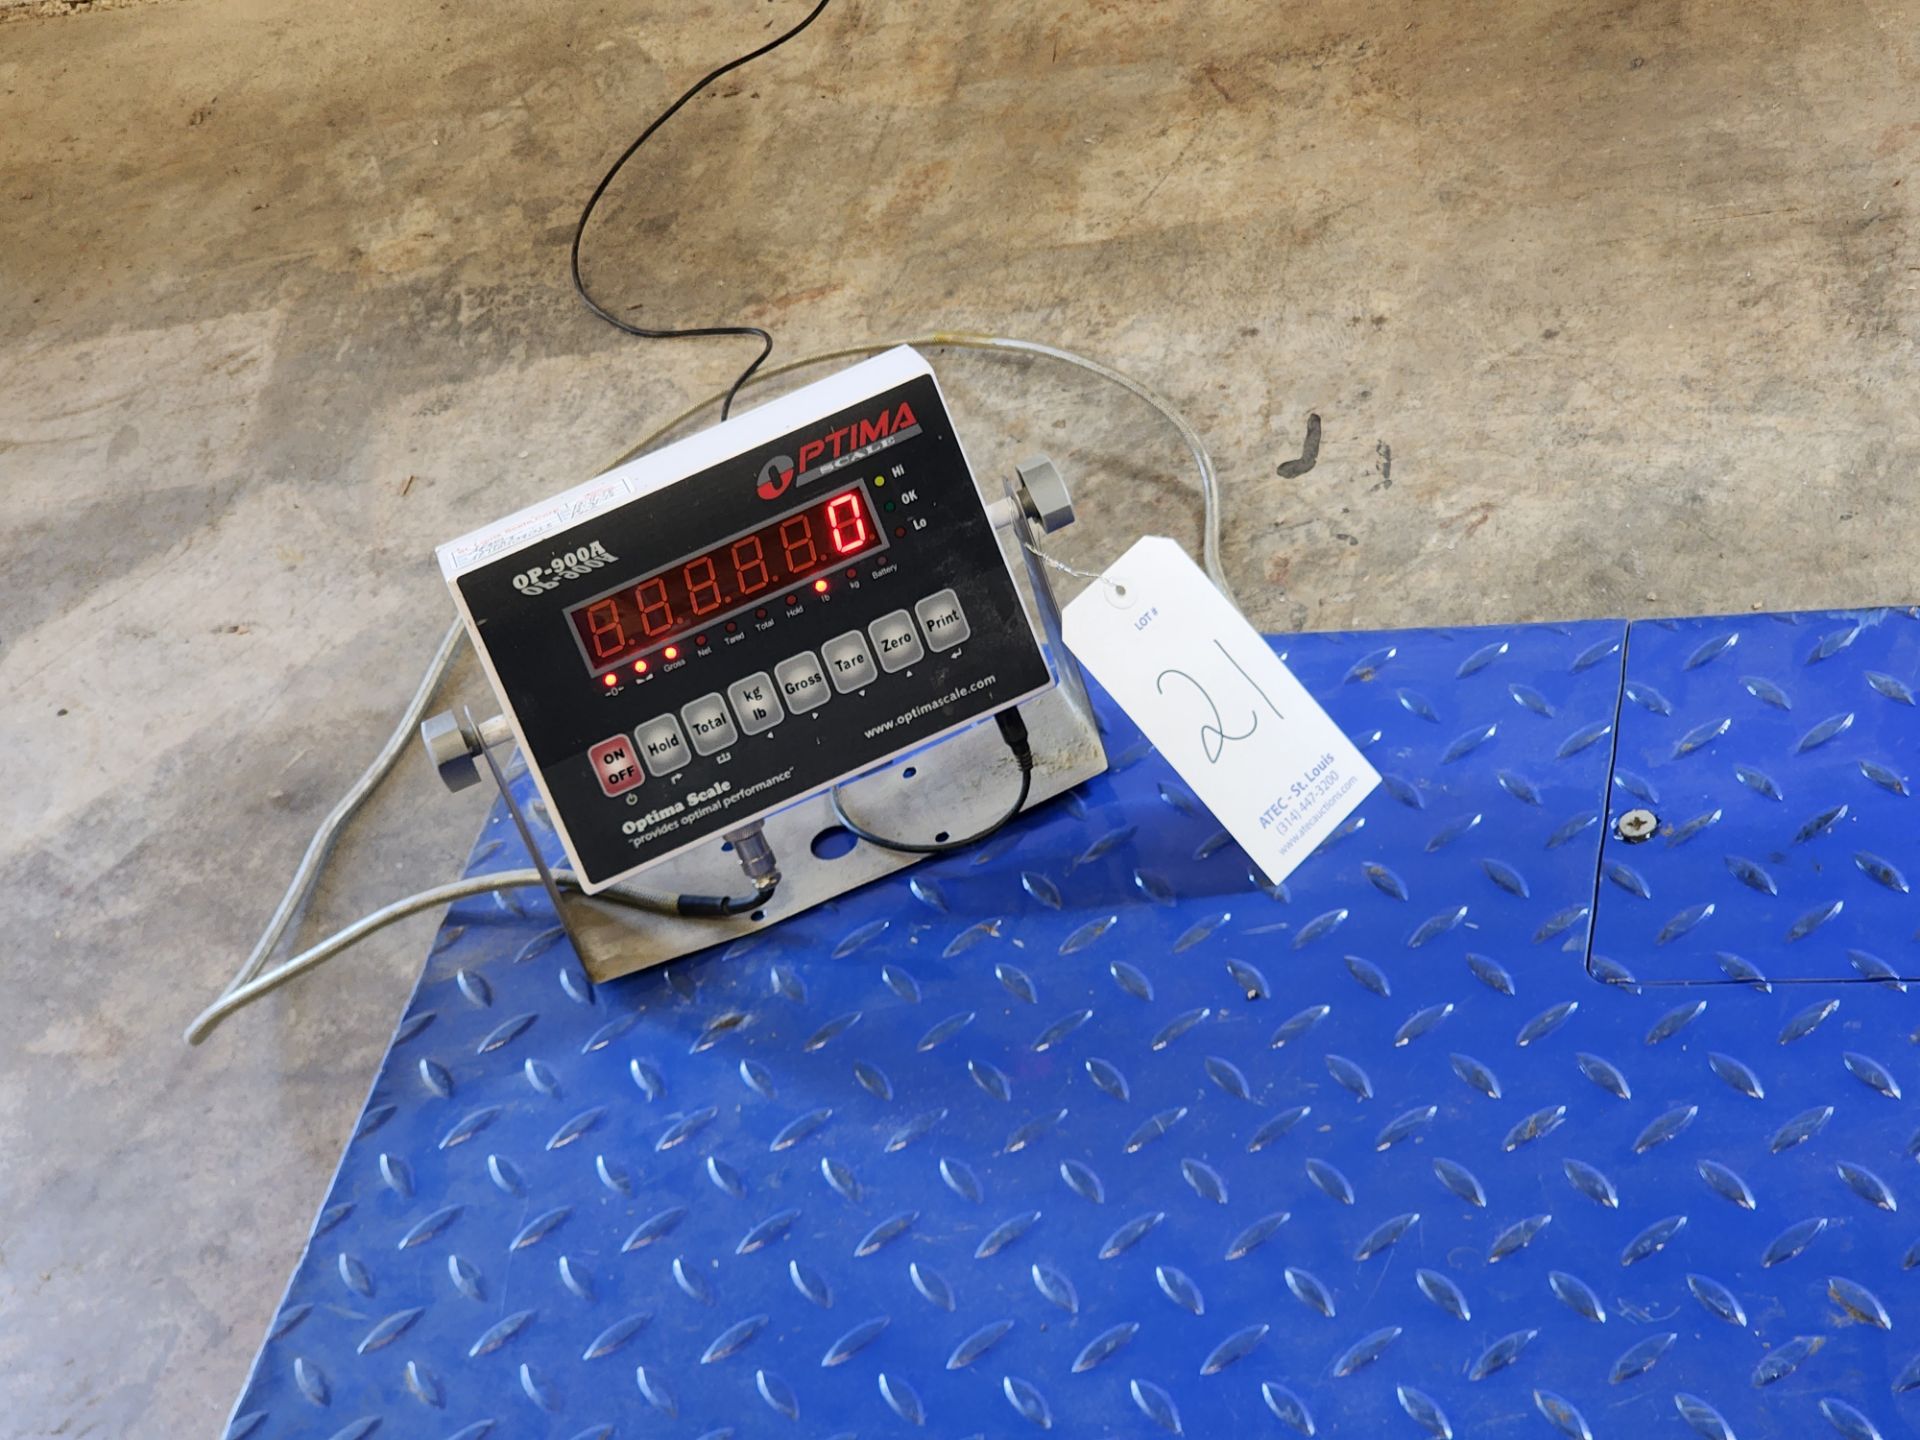 Locosc Precision Technology 4'x4' Floor Scale, 5,000-Lb Capacity w/LED Display - Image 3 of 6